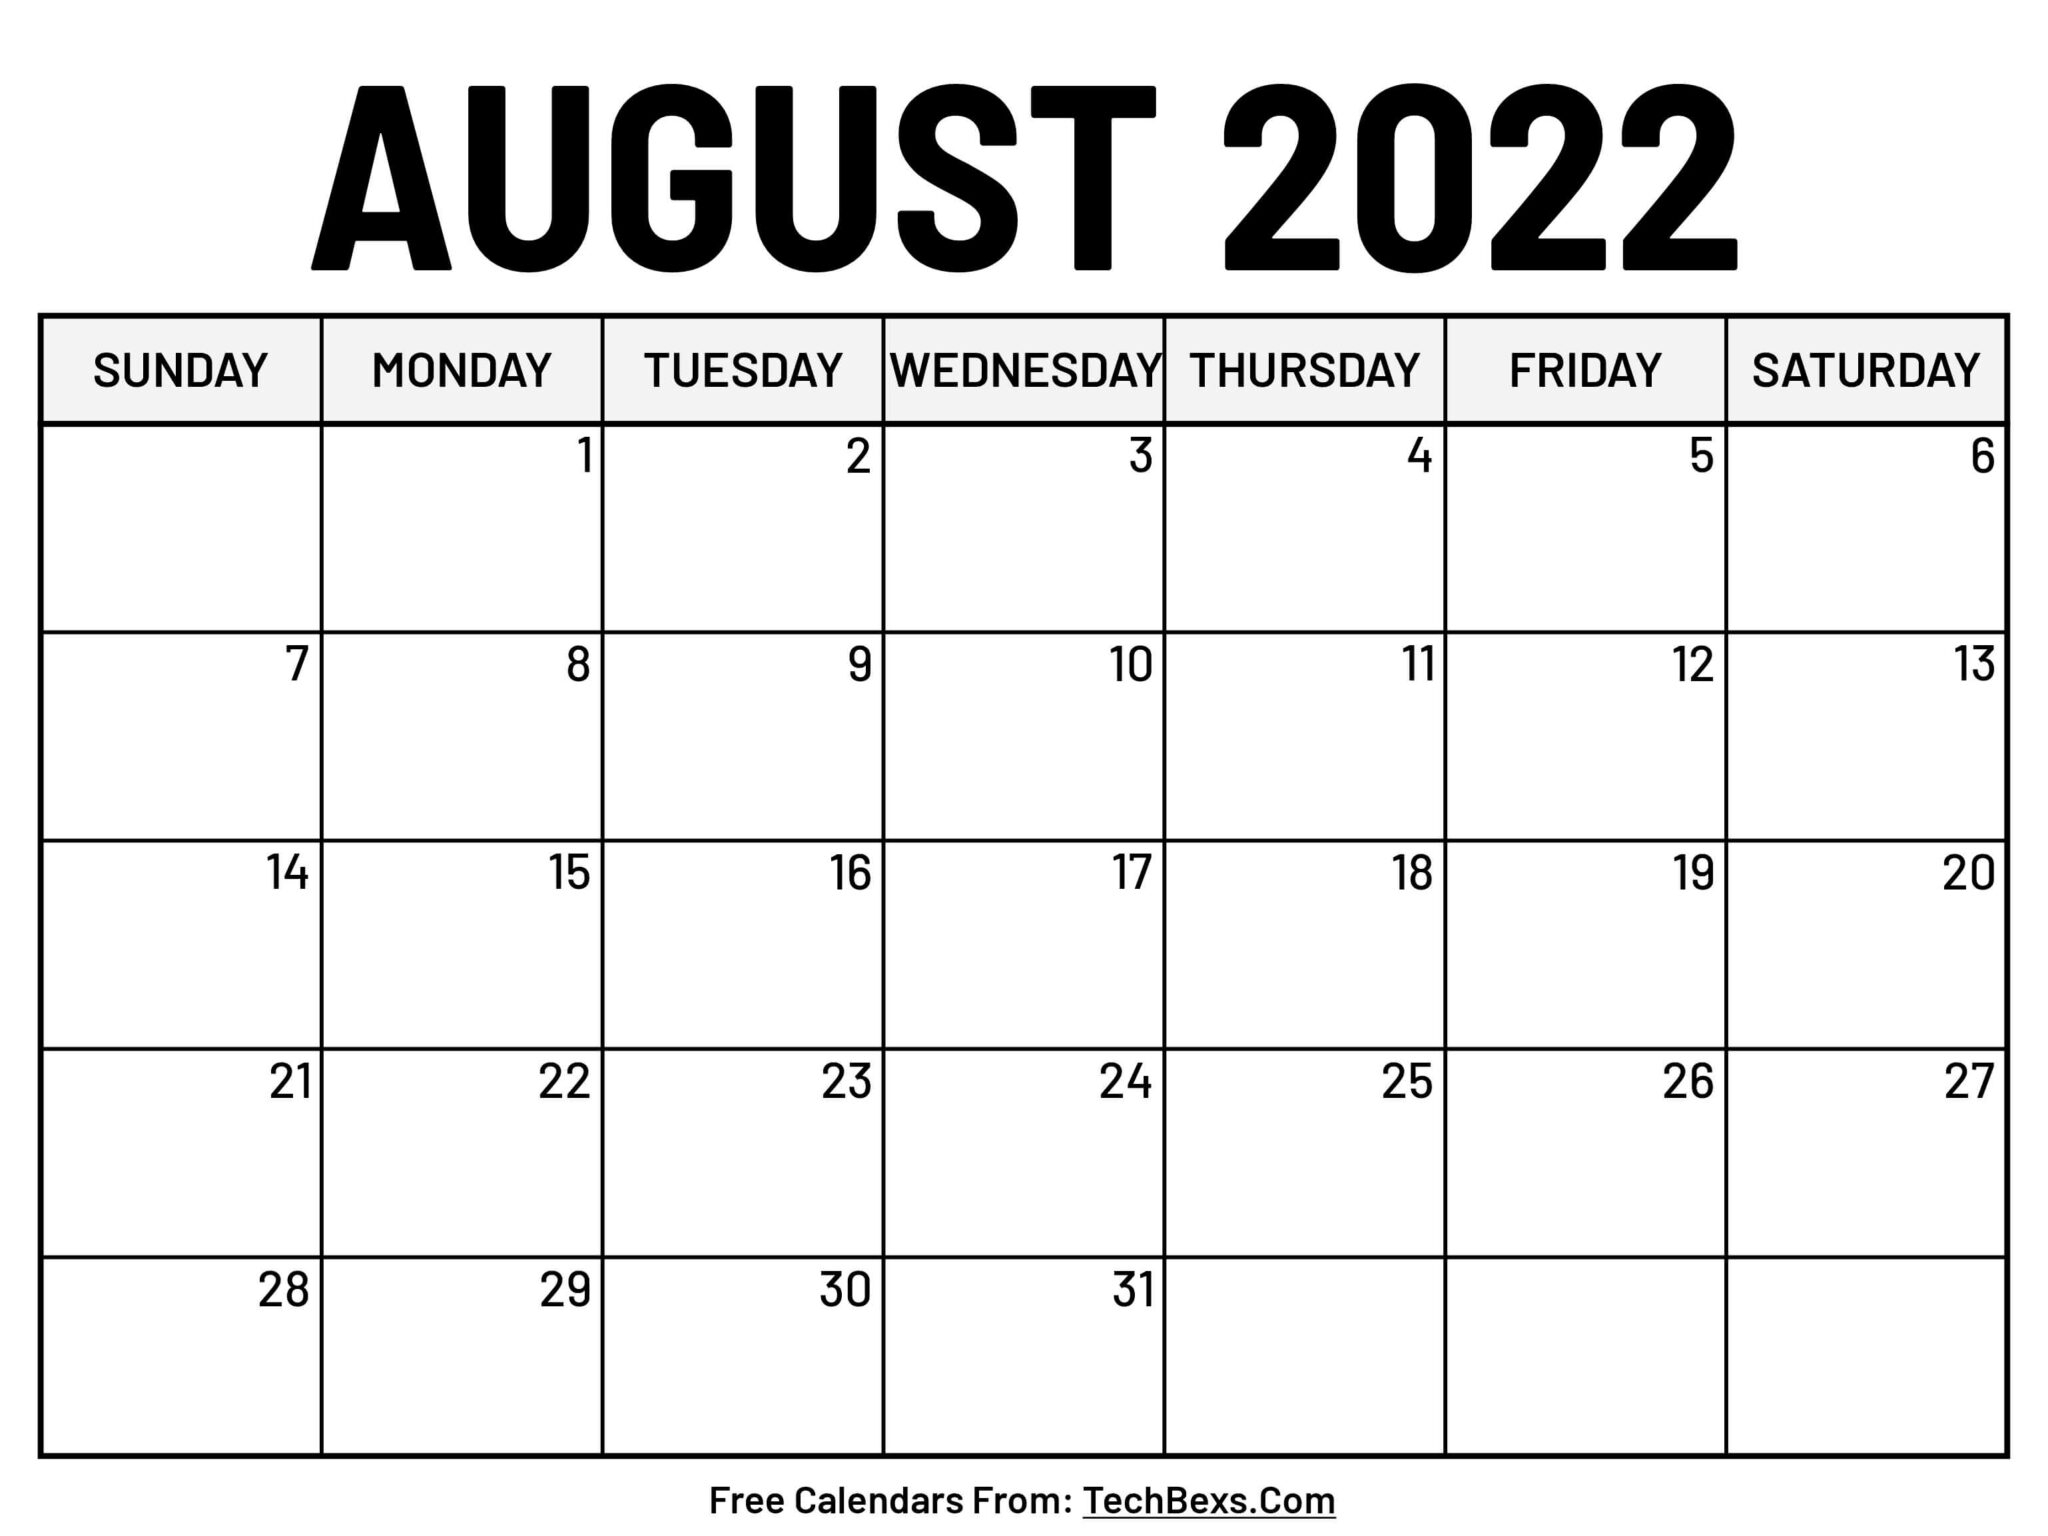 Monthly August 2022 Calendar Template  2022 Calendars For Planning intended for August 2022 Printable Calendar